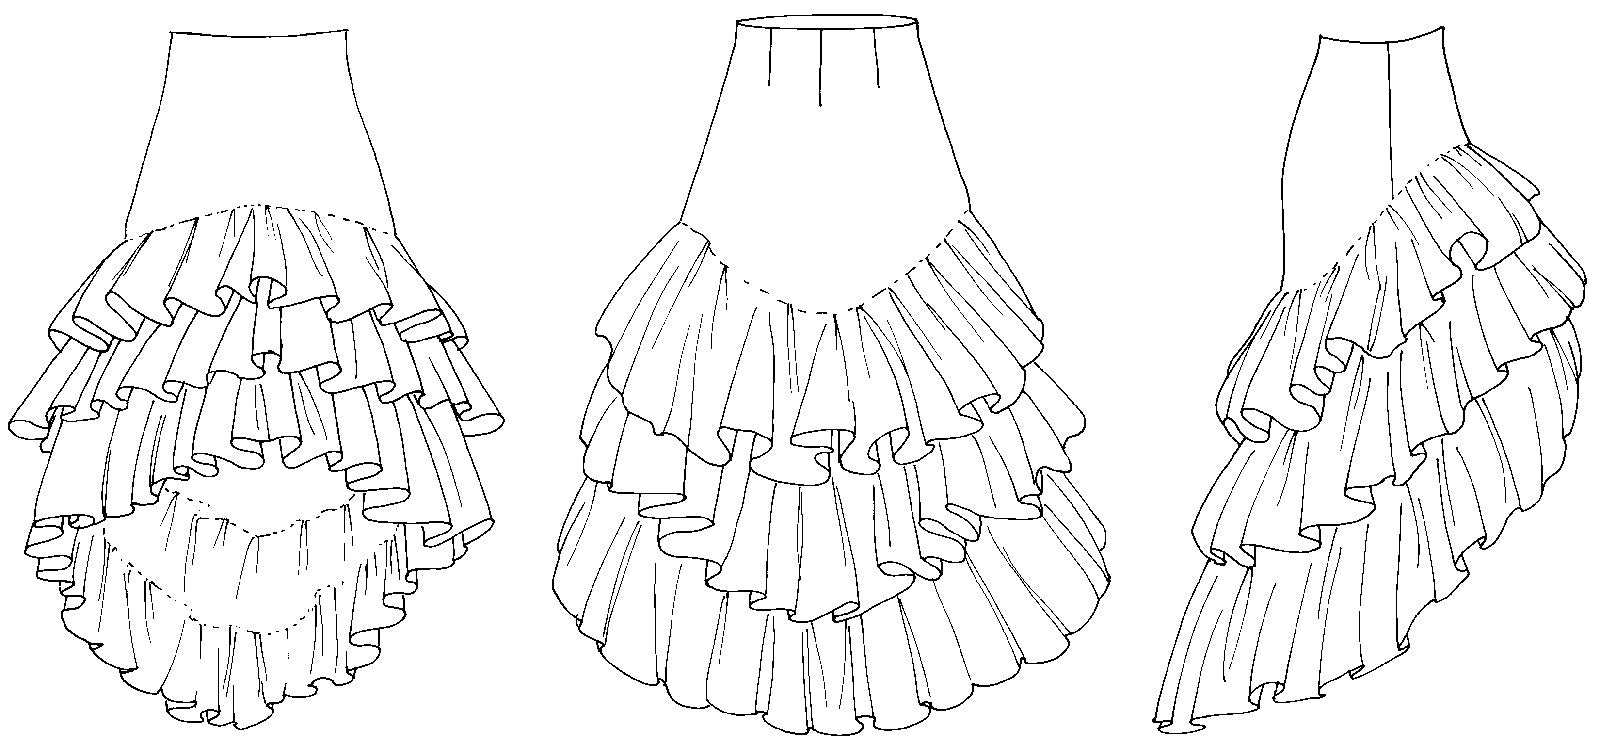 Flat line drawings of the Flamenco skirt.  Front back and side views.